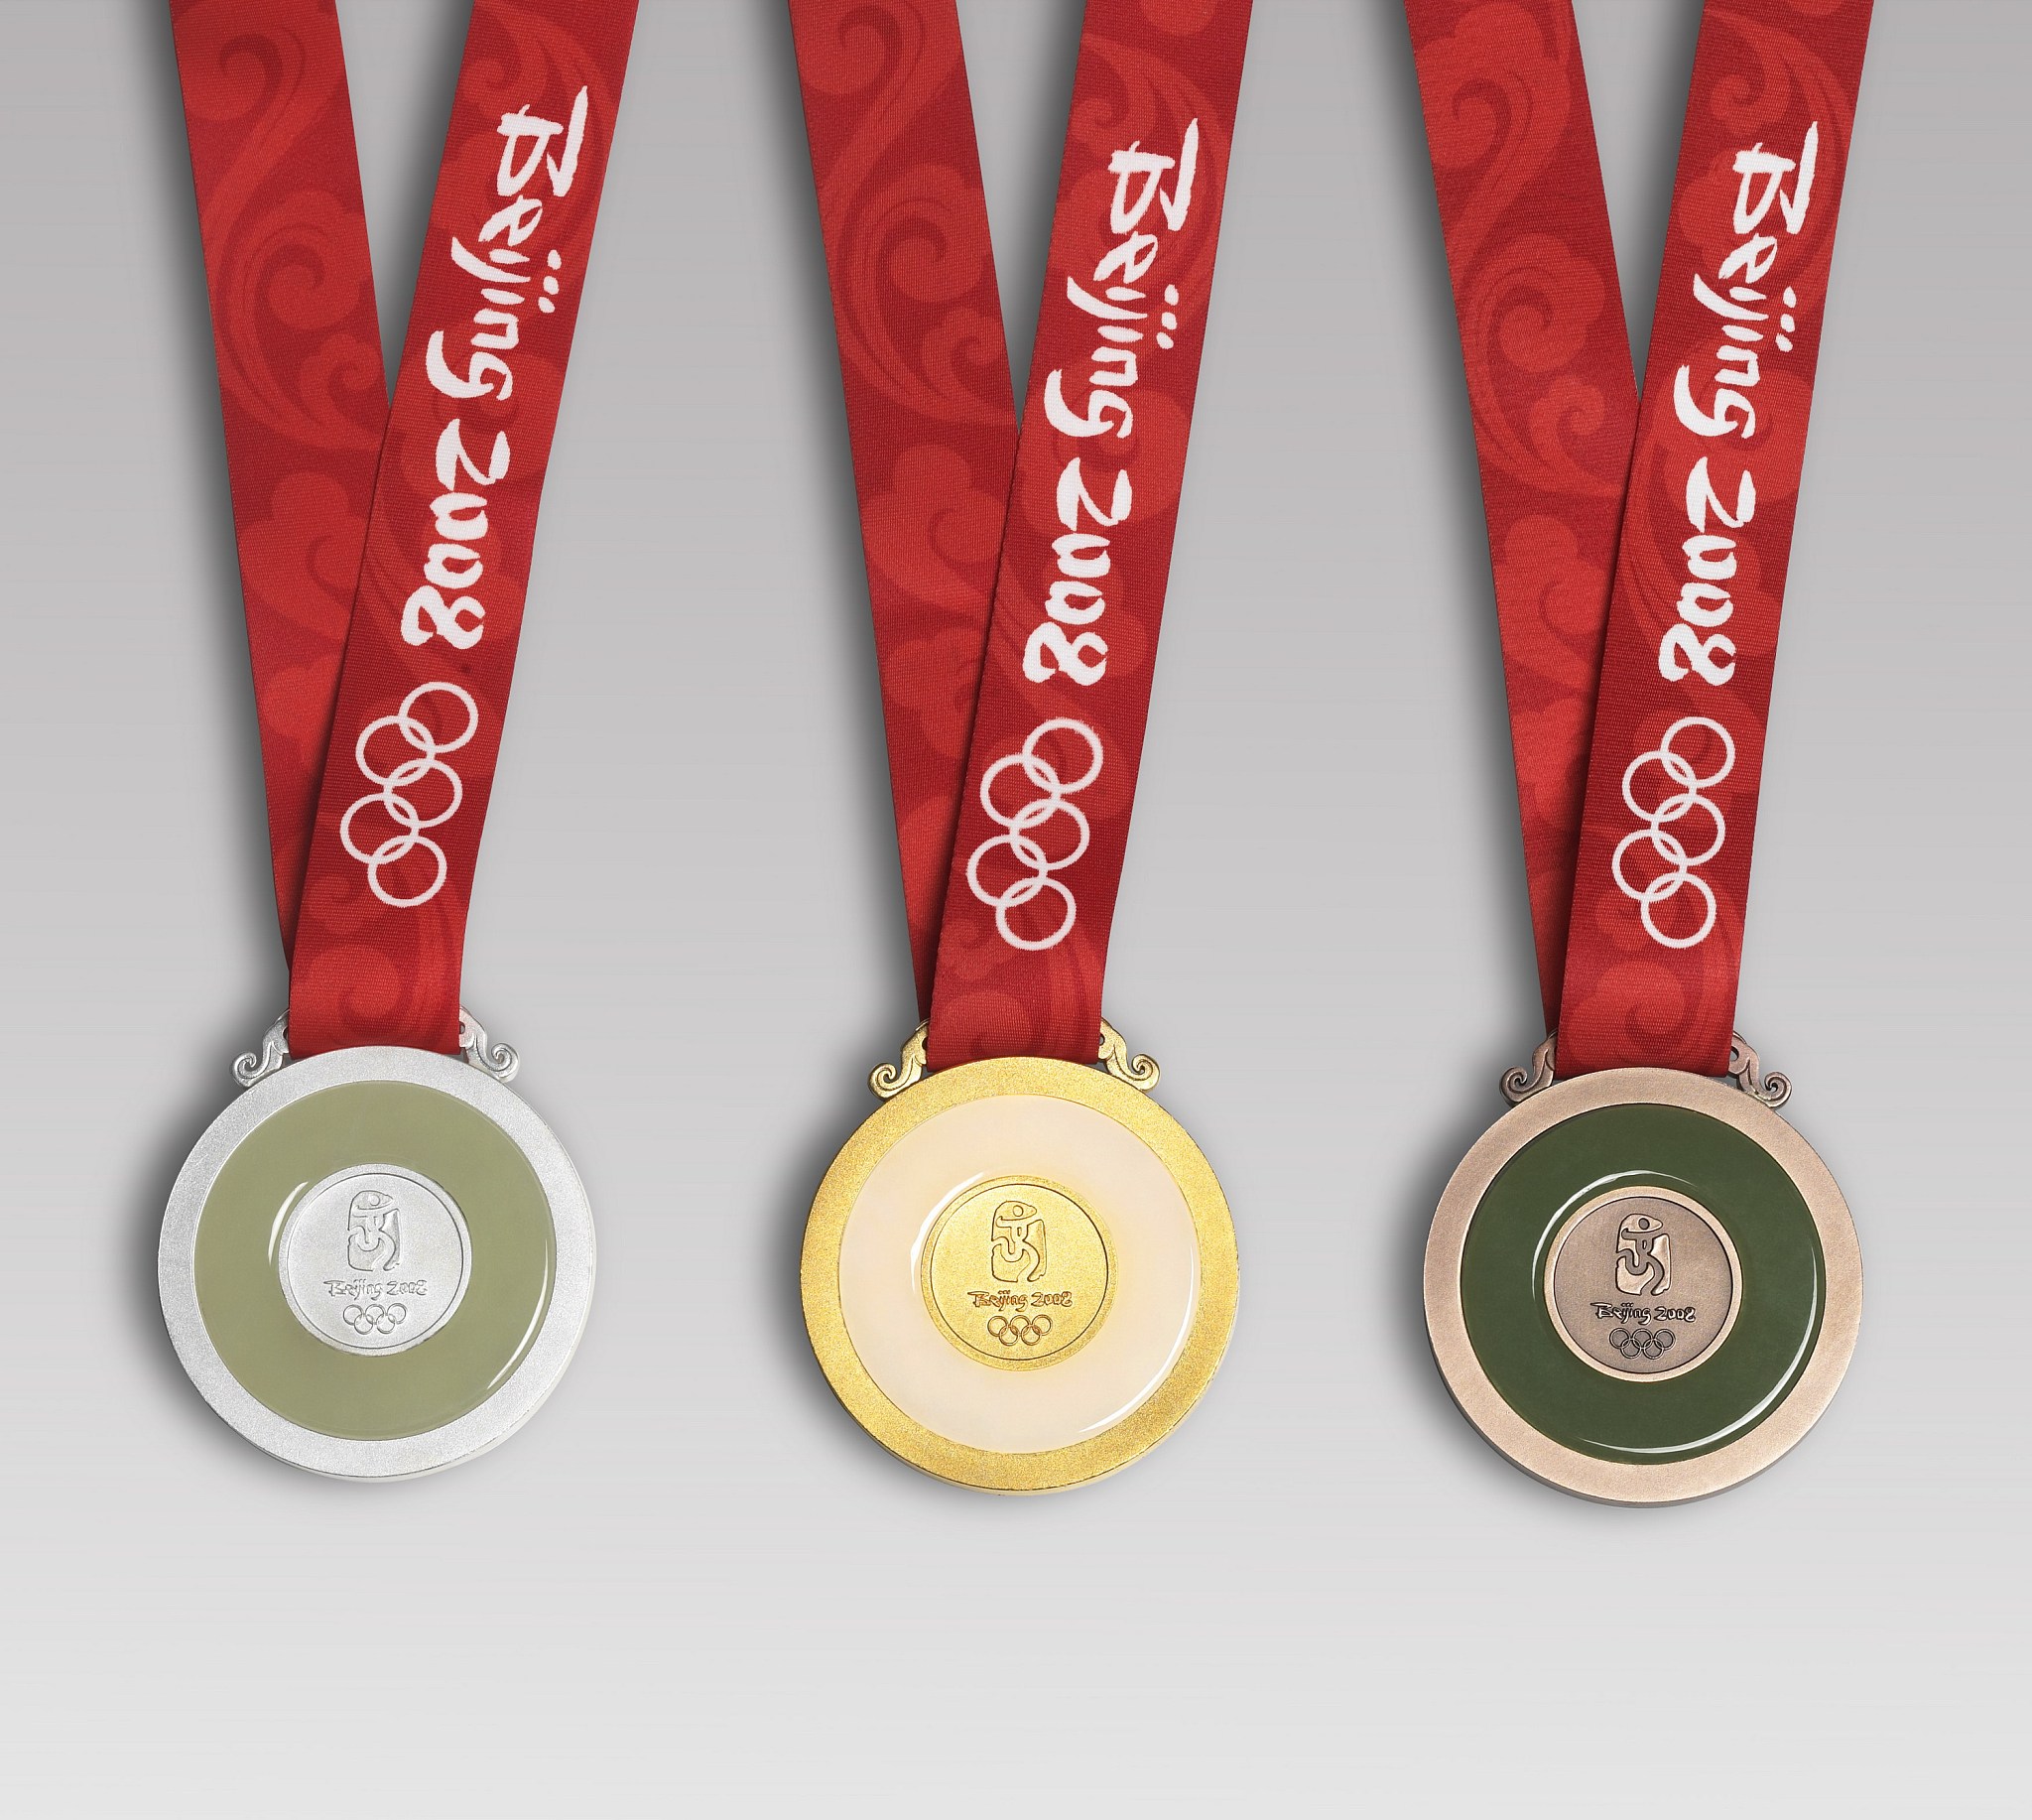 Jade-inlaid medals created for the Beijing 2008 Olympics /CFP